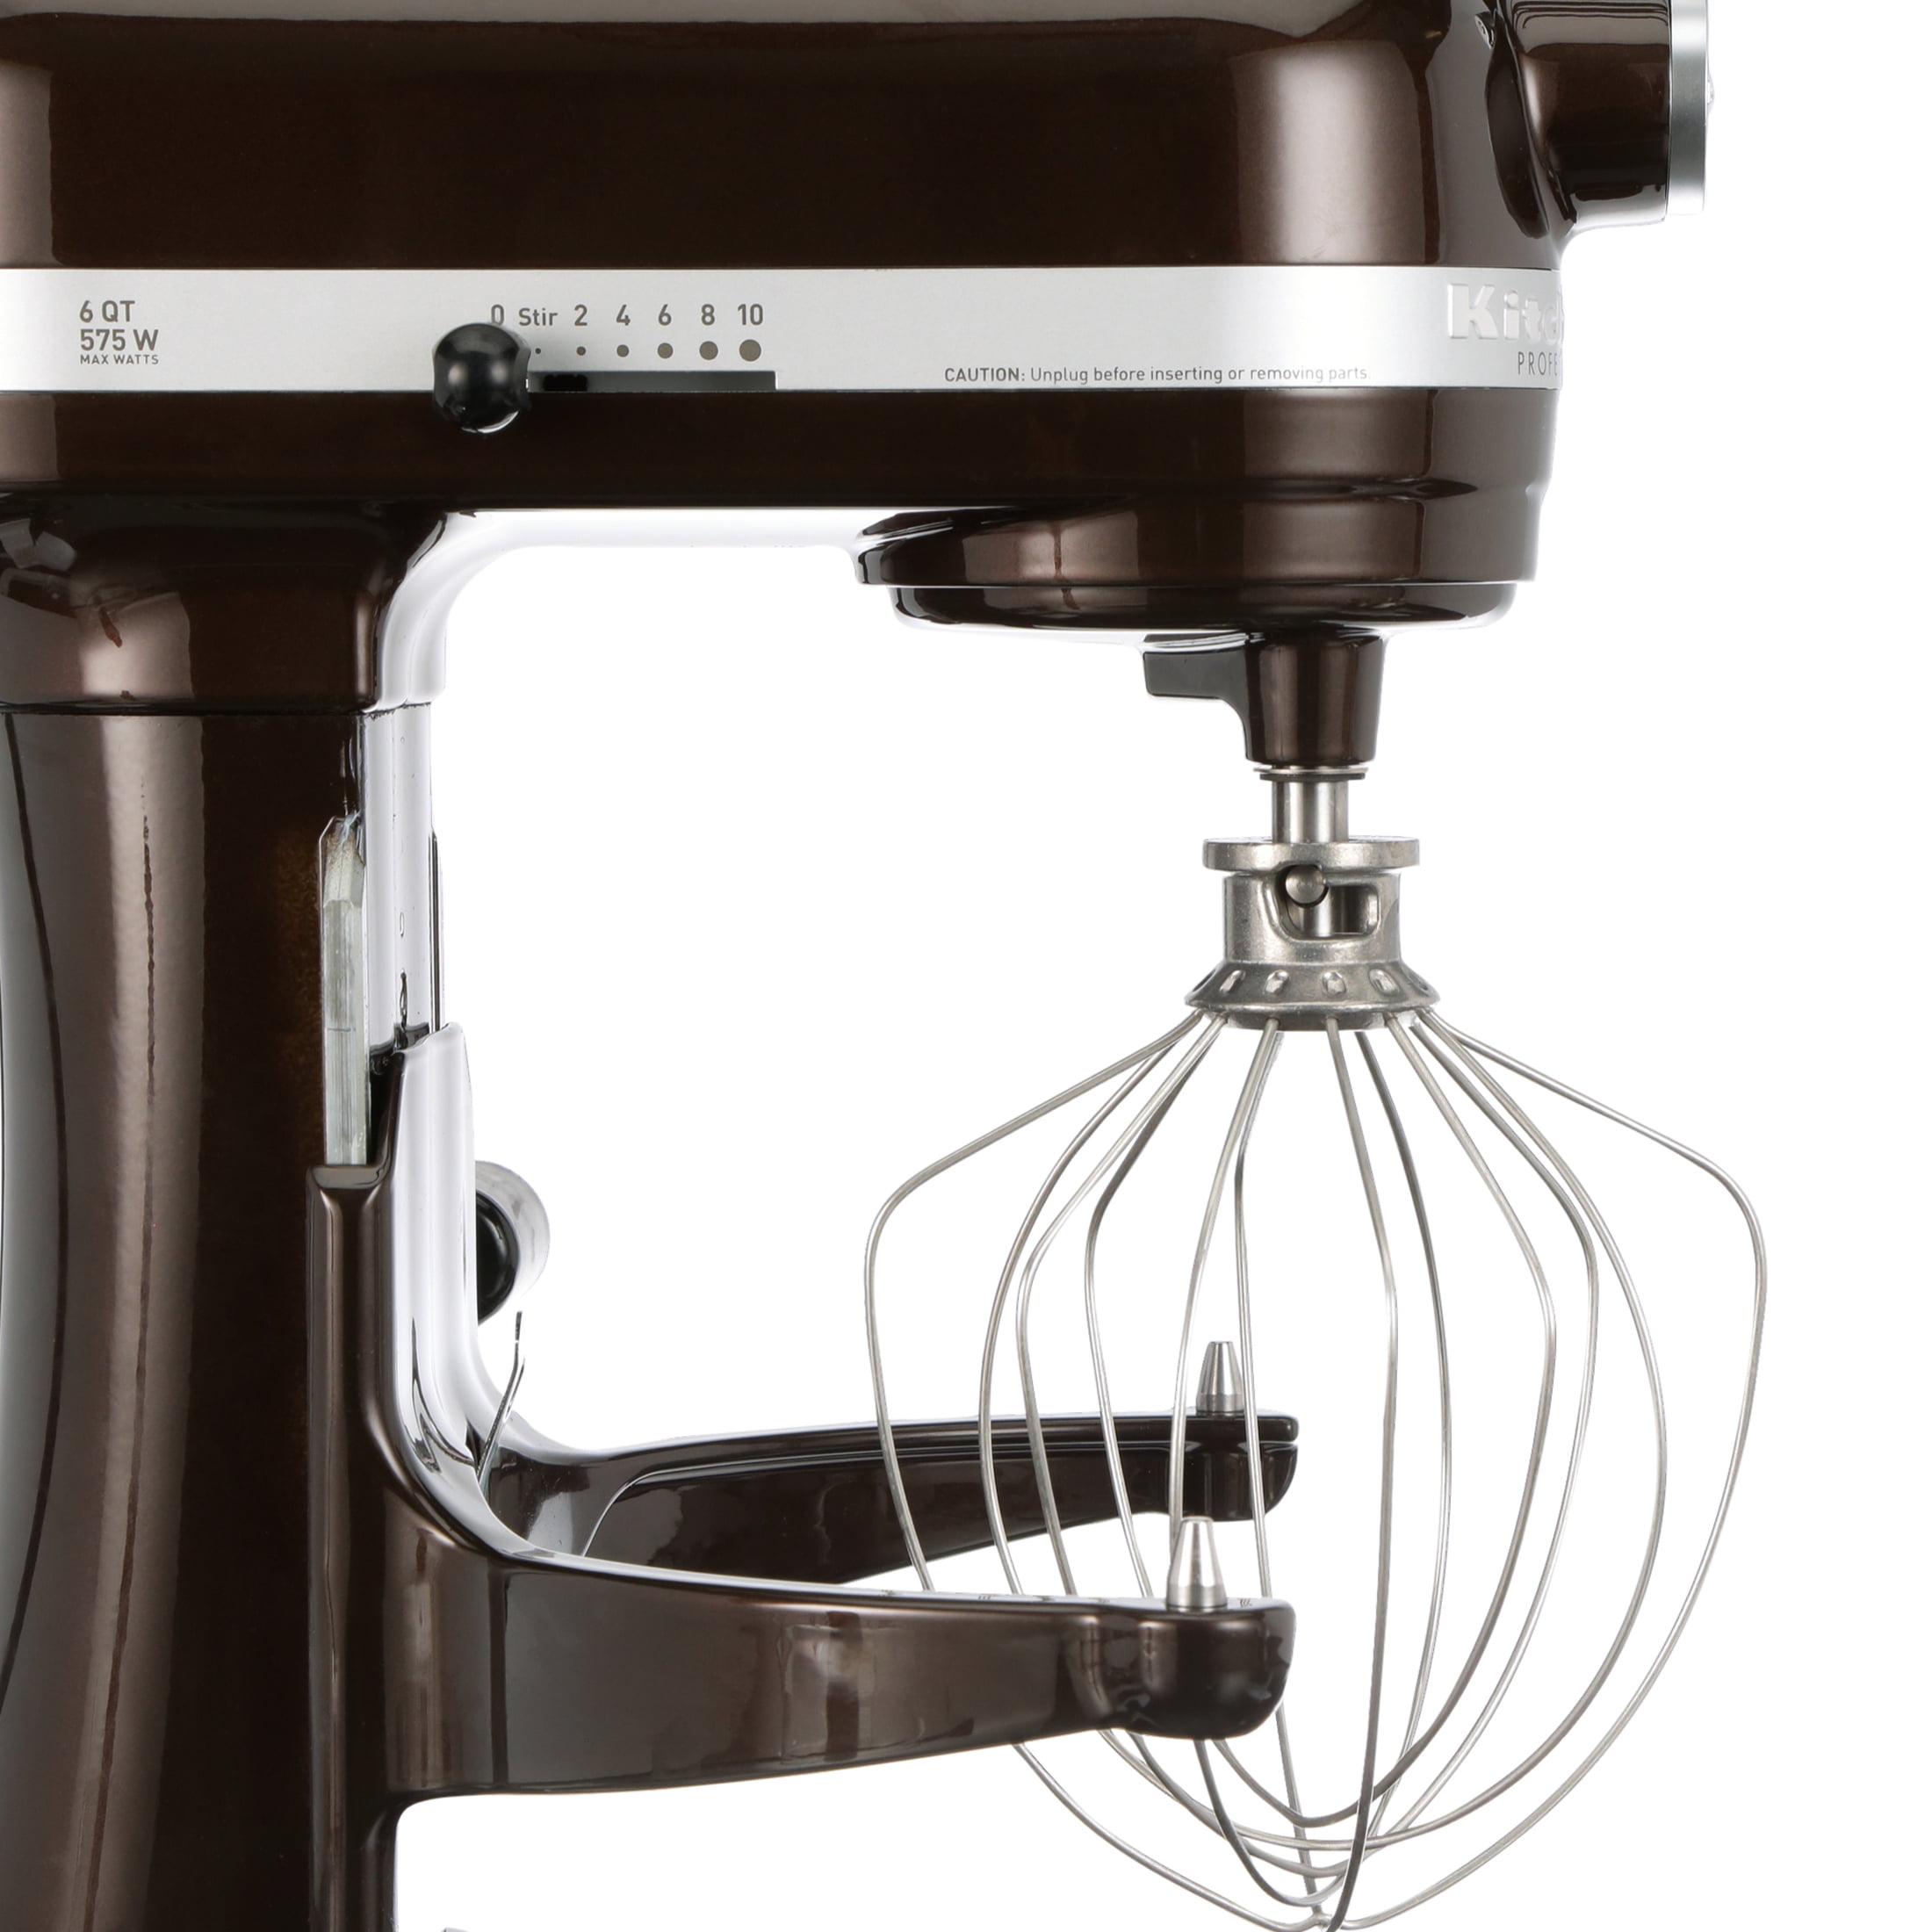 Mixing It Up with KitchenAid! - Lynlees